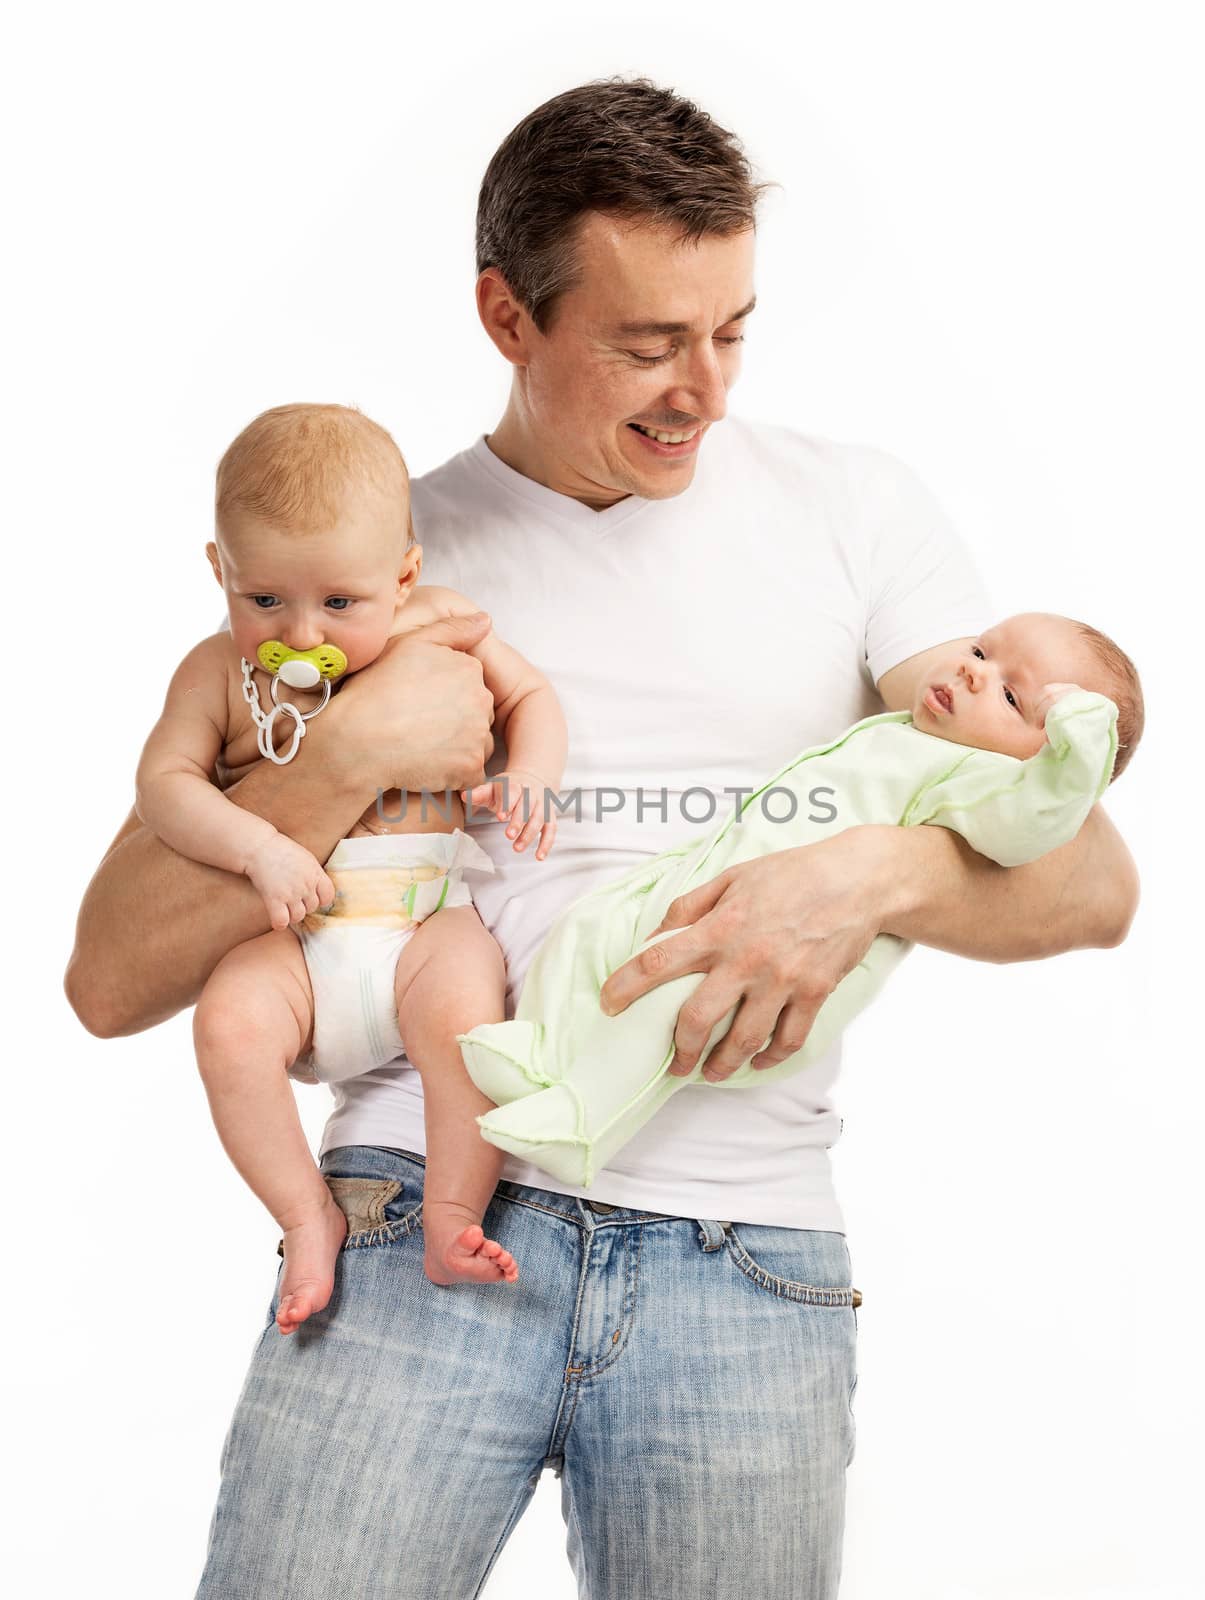 Smiling young man with two baby boys over white by photobac